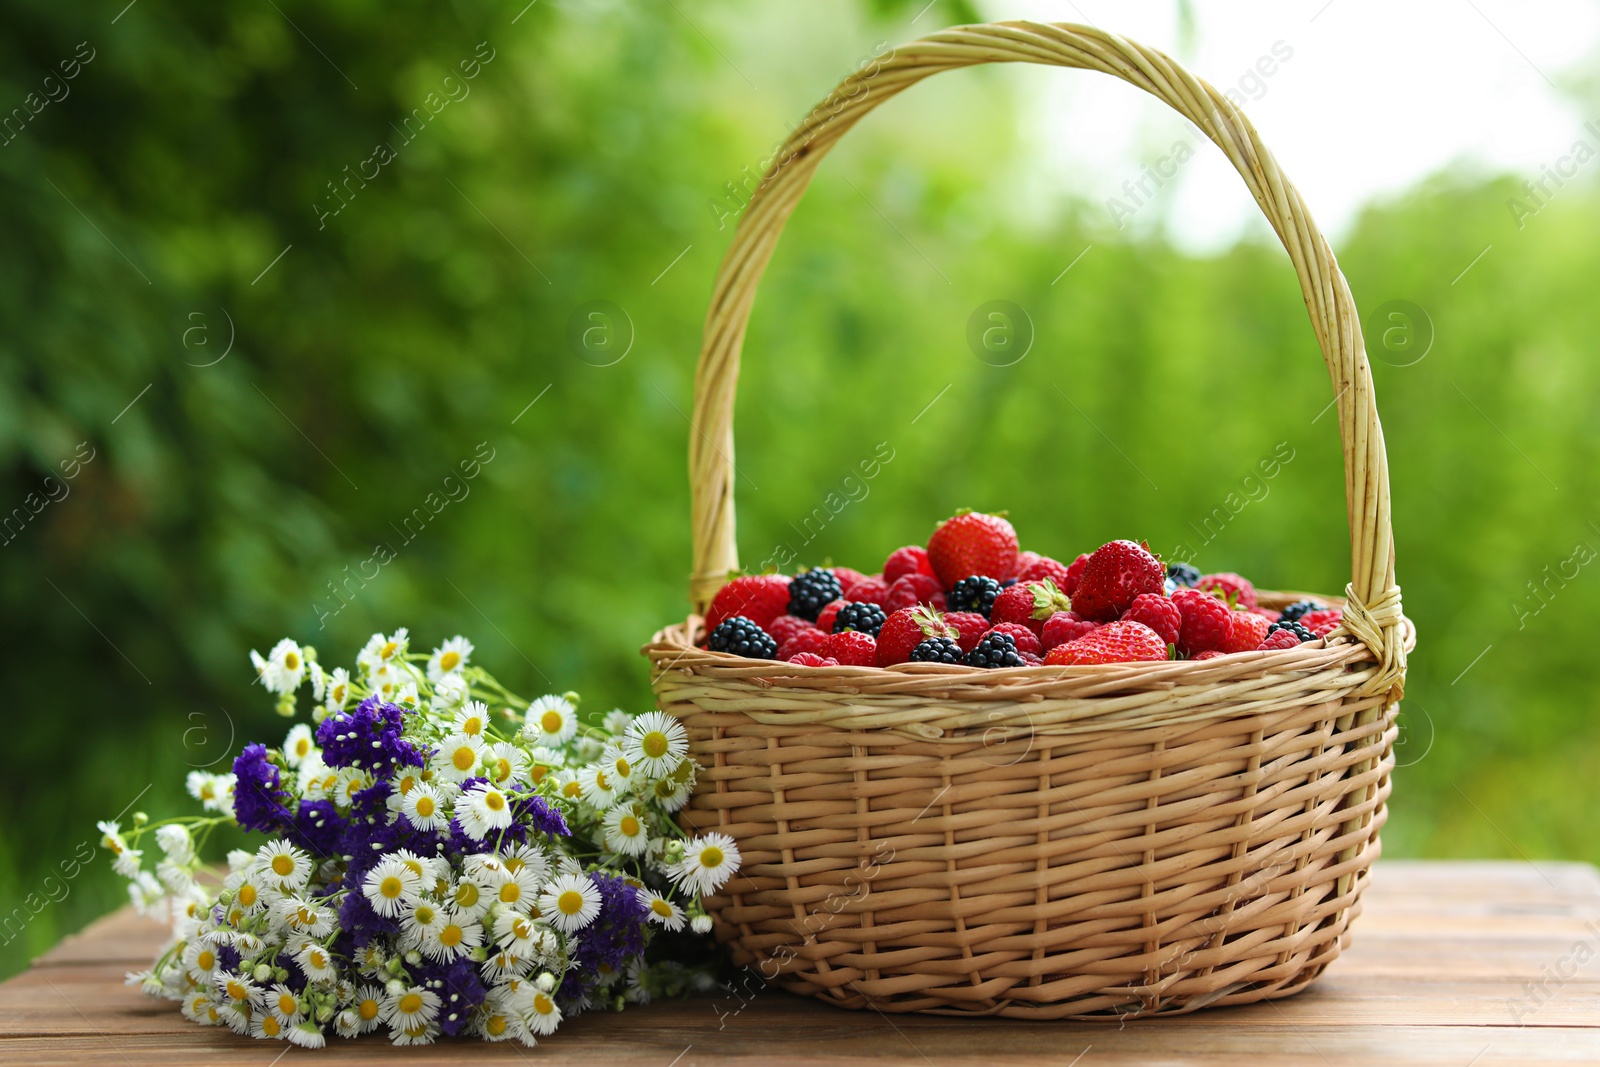 Photo of Wicker basket with different fresh ripe berries and beautiful flowers on wooden table outdoors